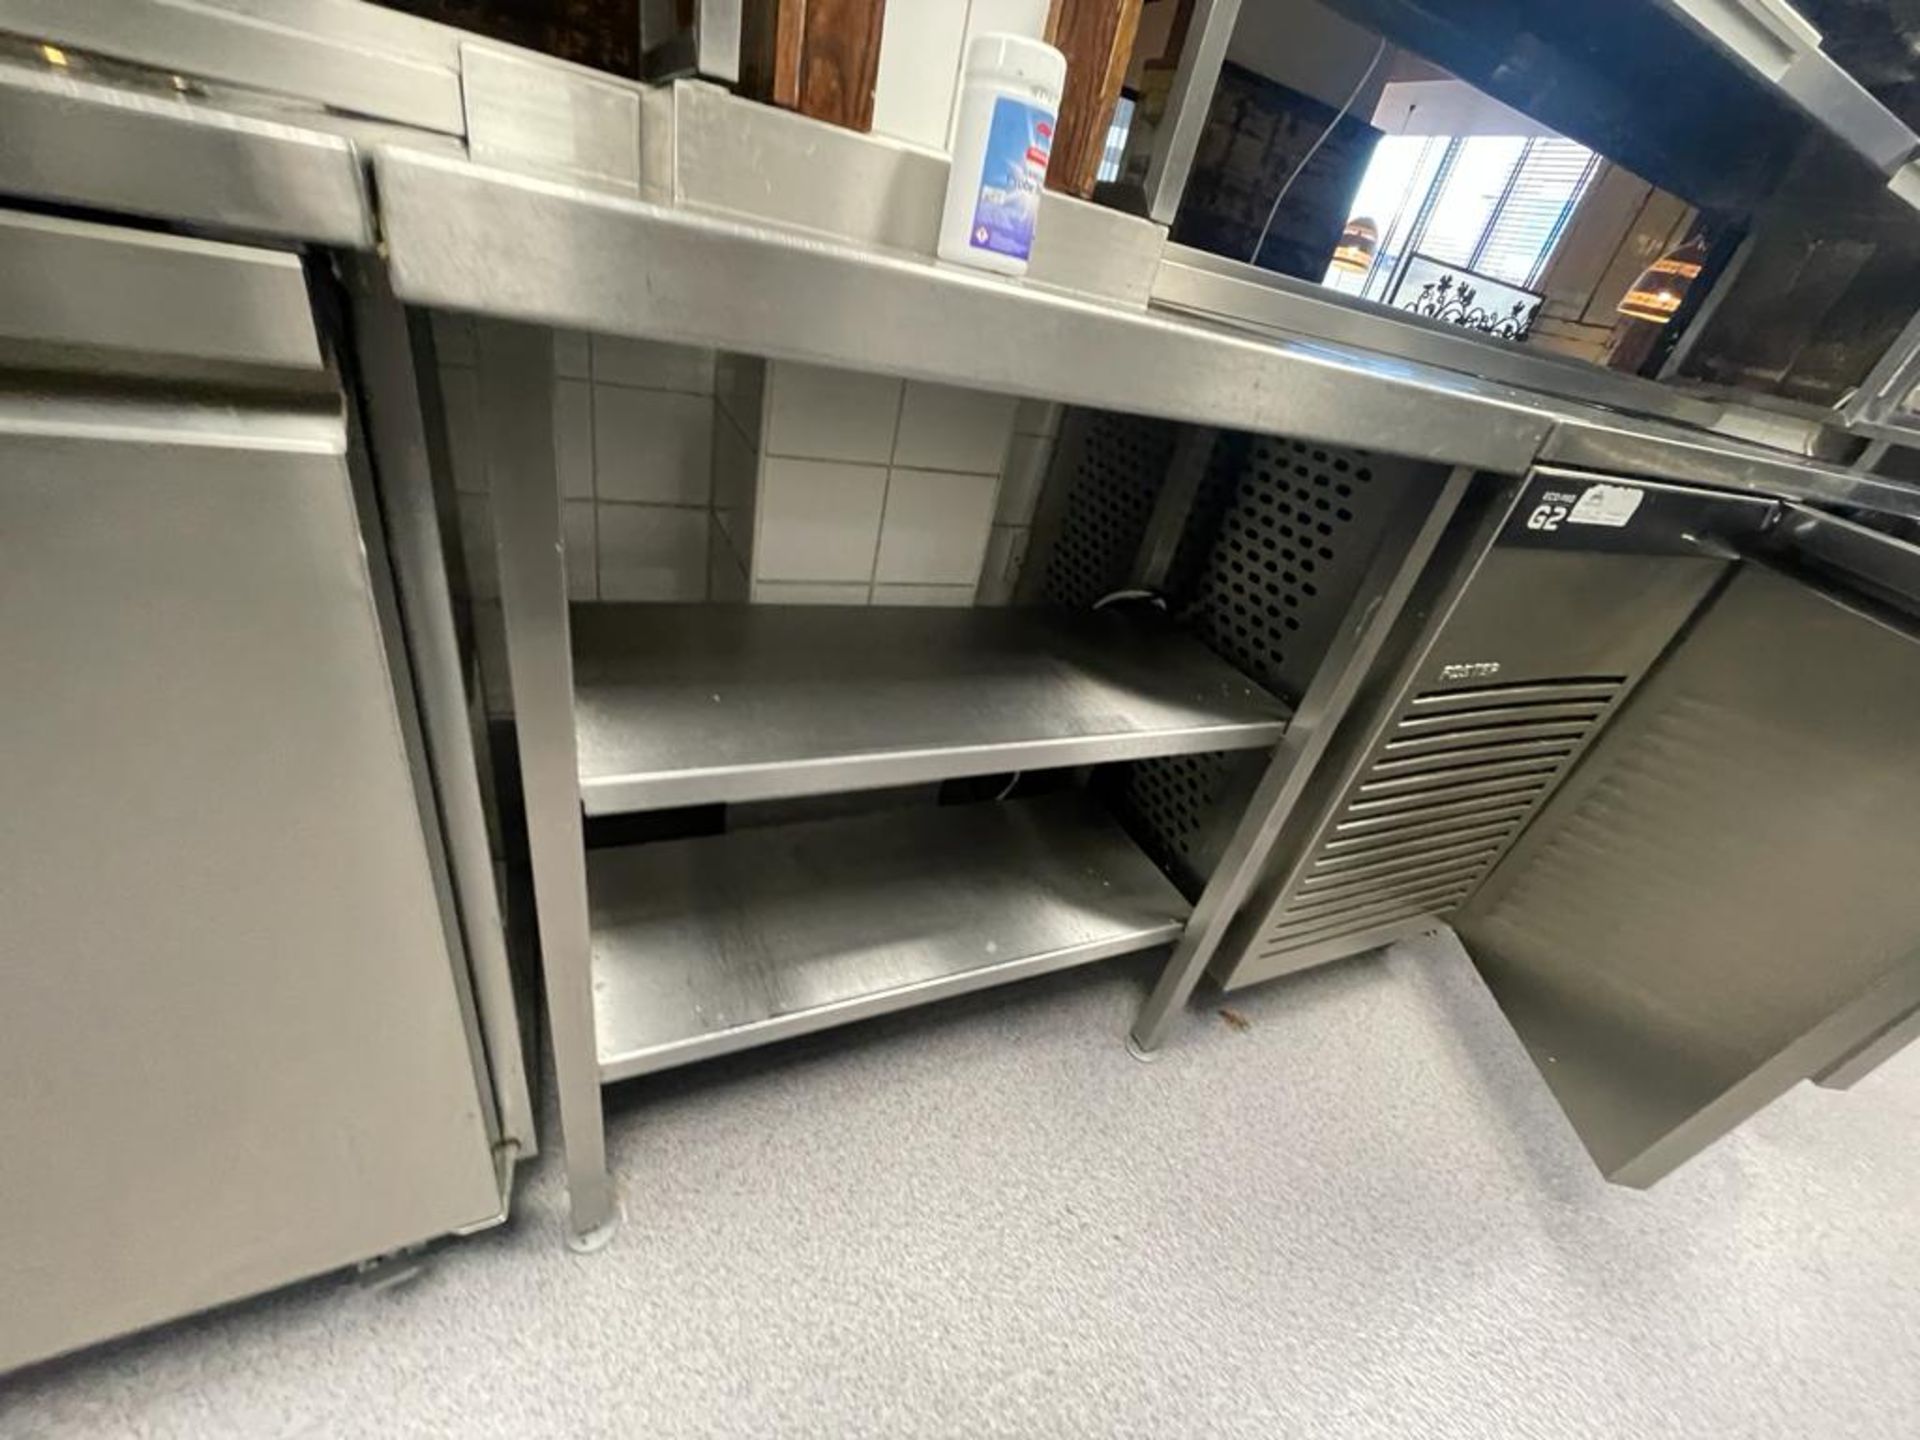 1 x Stainless Steel Prep Table With Post Cut Out and Undershelves - Ref: PAV131 - Image 3 of 4